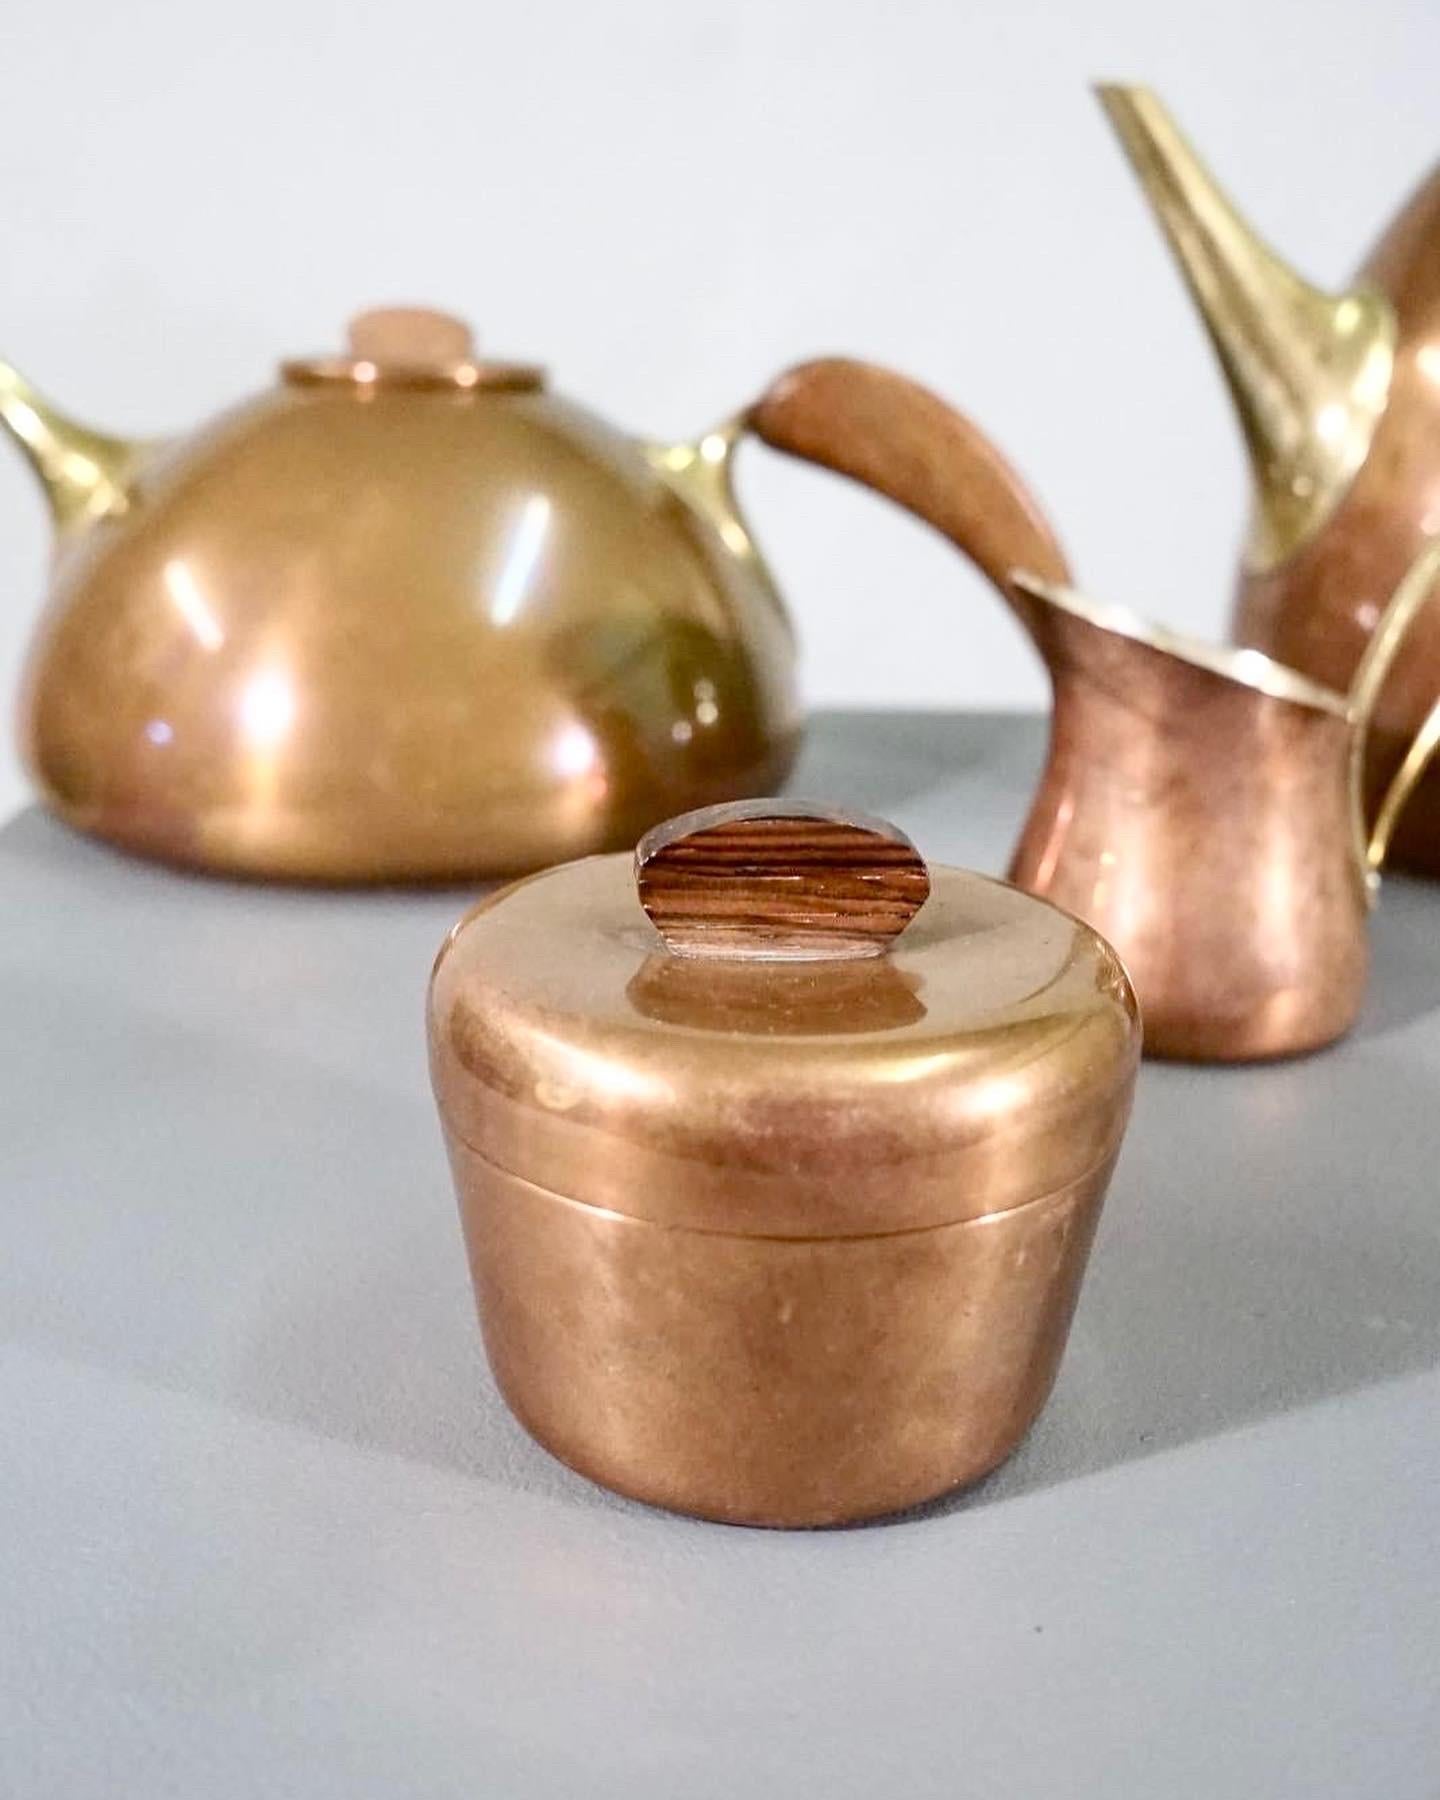 Rare and important Karl Hagenauer coffe and tea set in copper and brass with rosewood details manufactured on license by Illums Bolighus.

The set is in great original condition and is not often seen all together, the set includes a coffe pot, tea